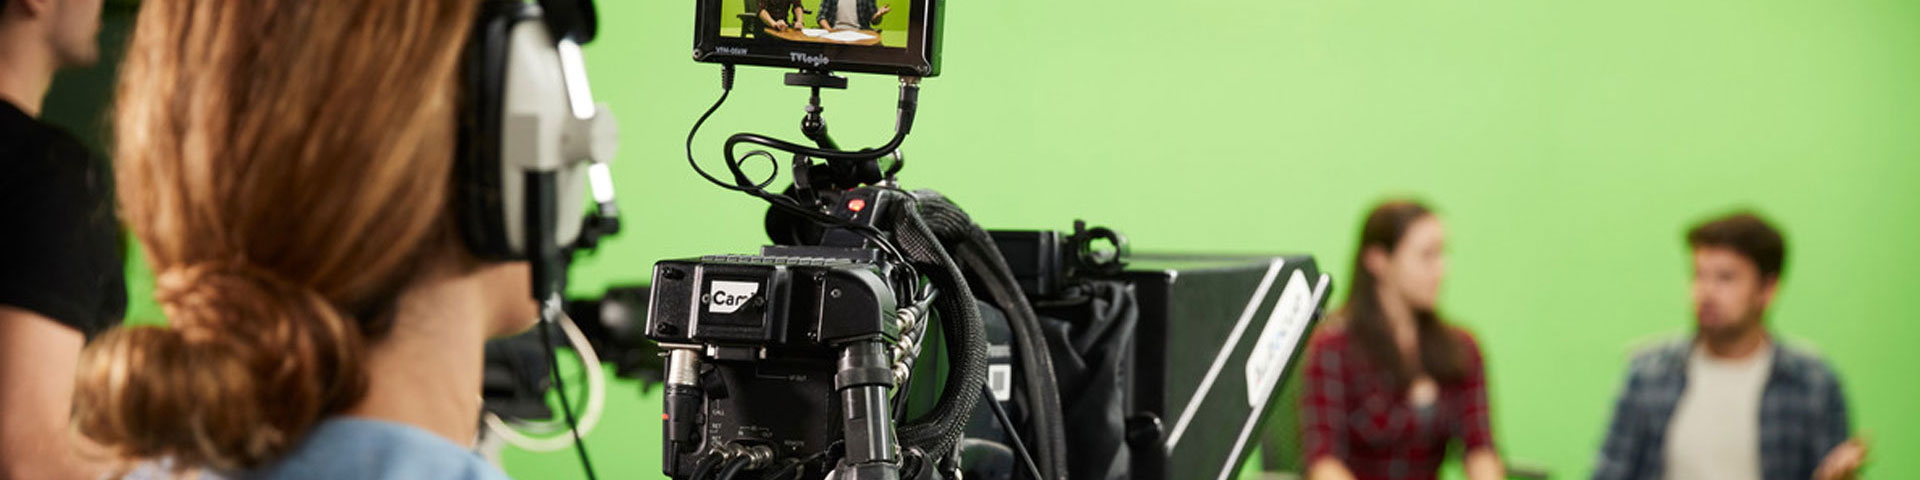 A student with headphones on looks down a large TV camera at a boy and girl sat down on two chairs behind a table and in front of a green screen.